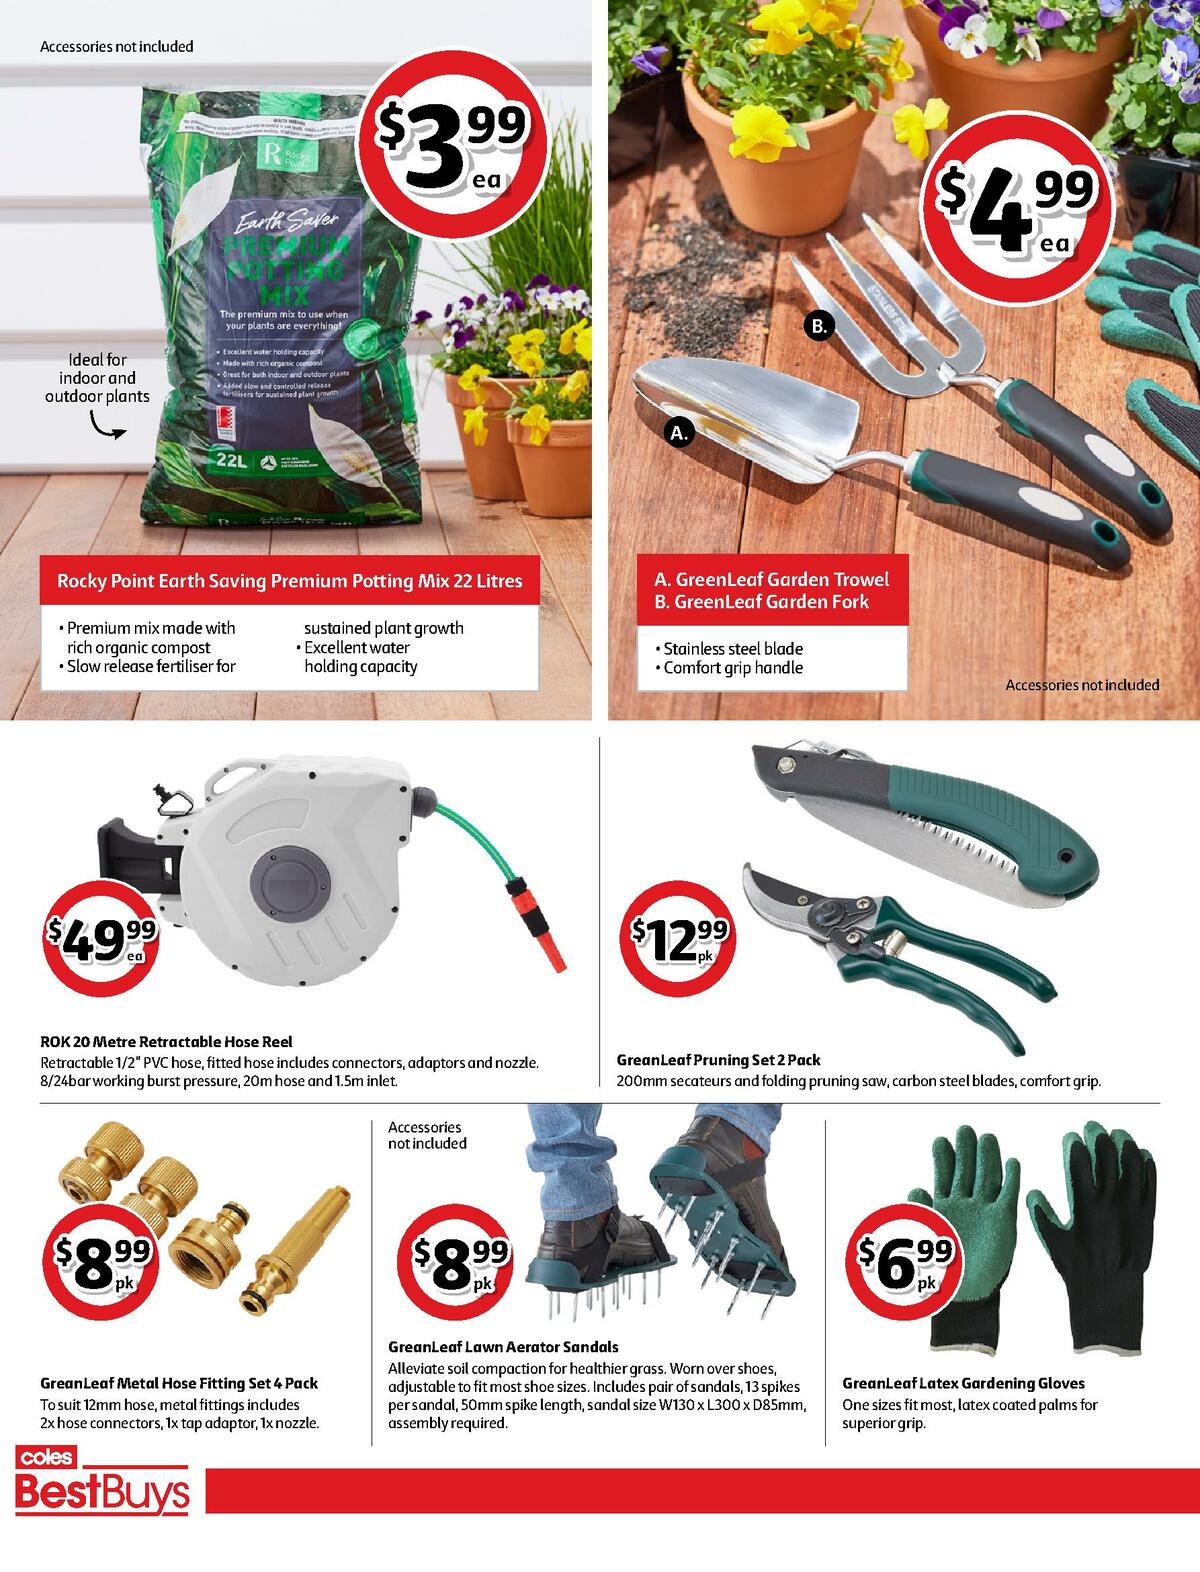 Coles Best Buys - Spring Gardening Catalogues from 24 September